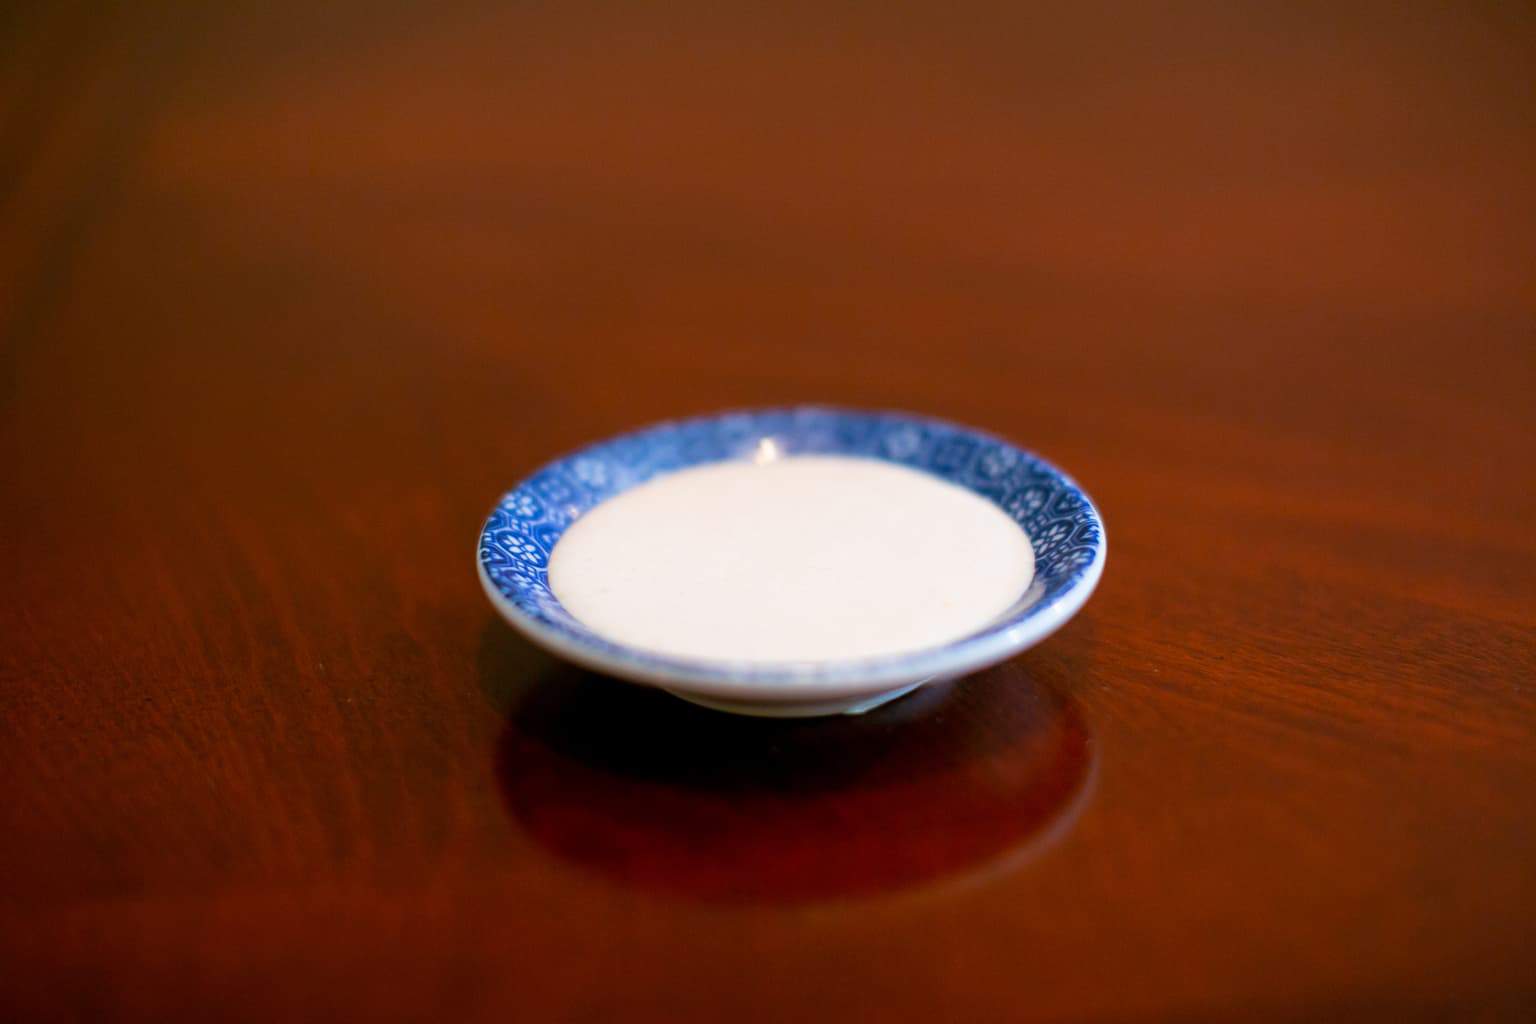 A small saucer with Japanese white sauce placed on a brown wooden table